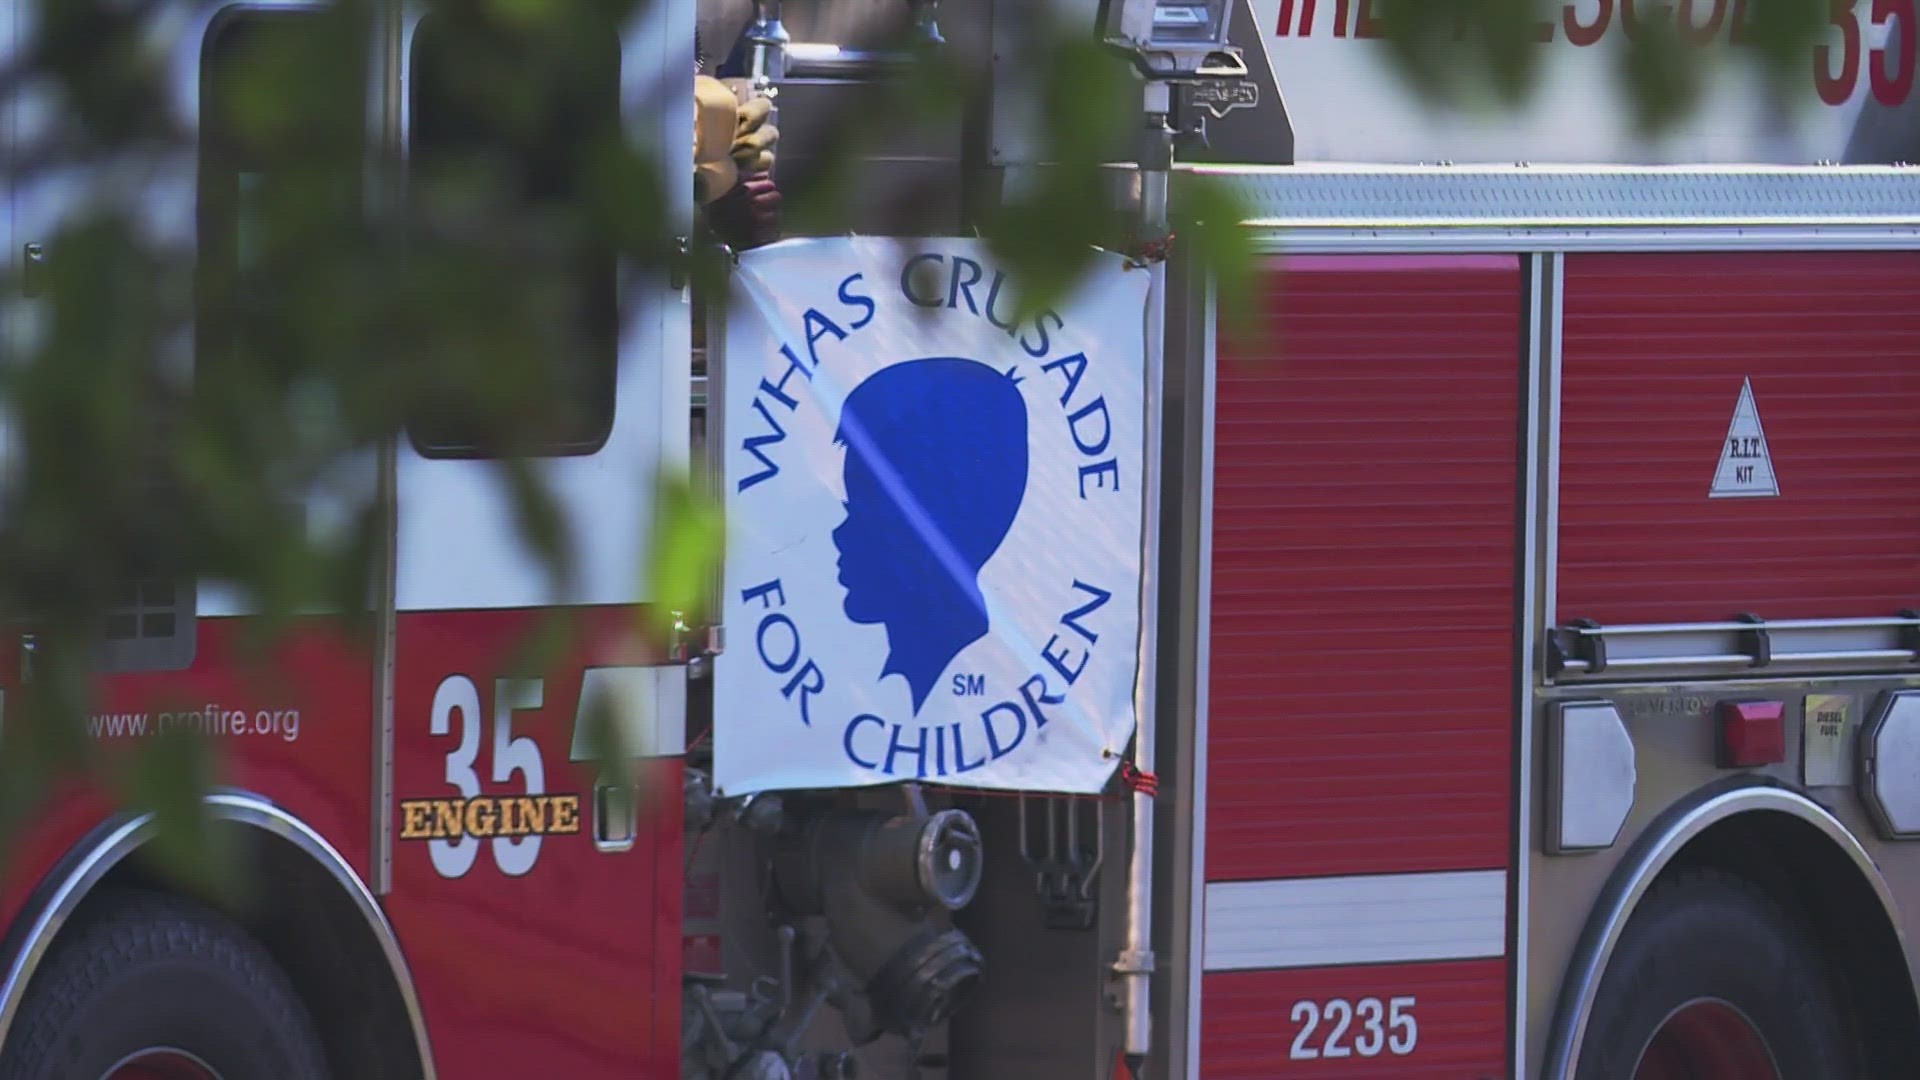 Firefighters volunteer year after year for WHAS Crusade for Children.